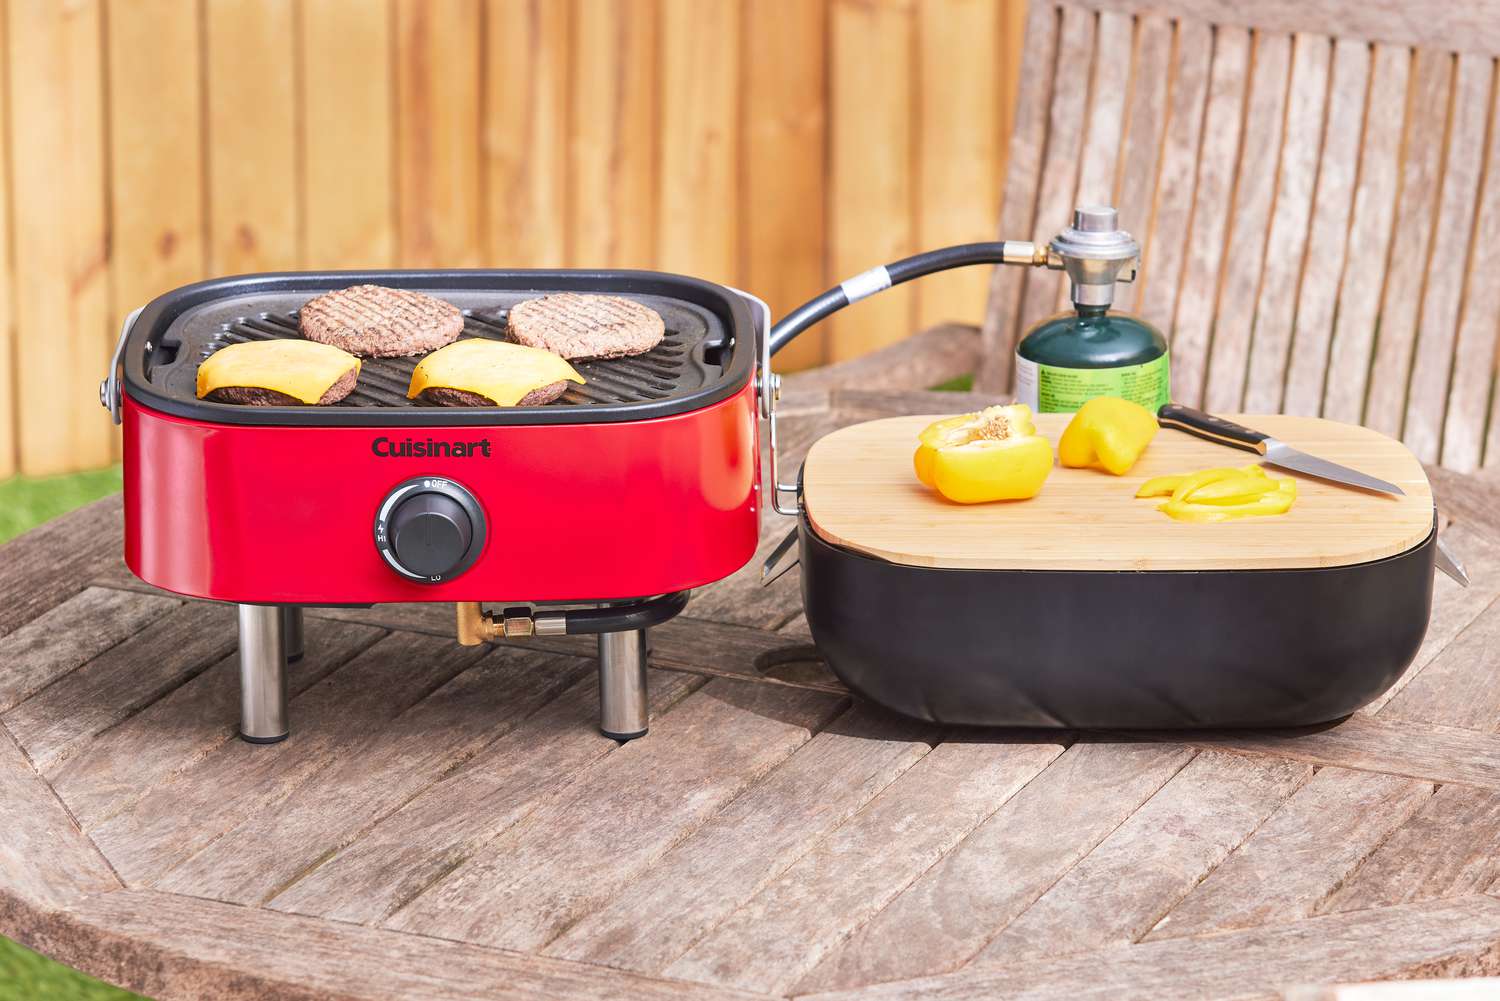 a portable gas grill on a wooden tabletop